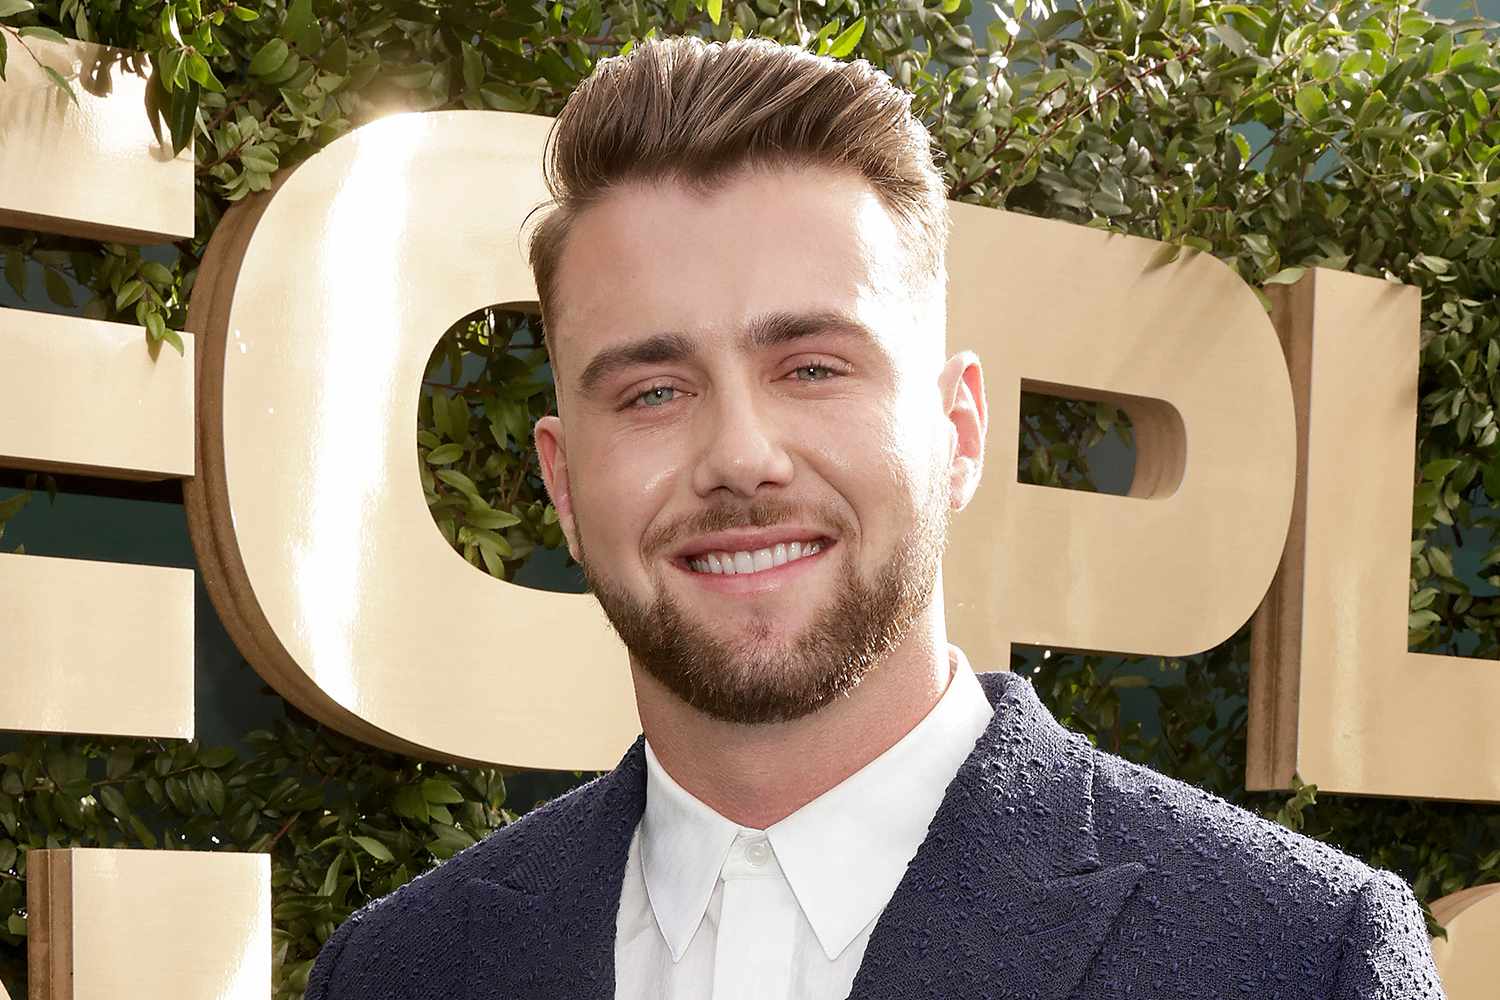 'Dancing With the Stars' alum Harry Jowsey reveals cancer diagnosis